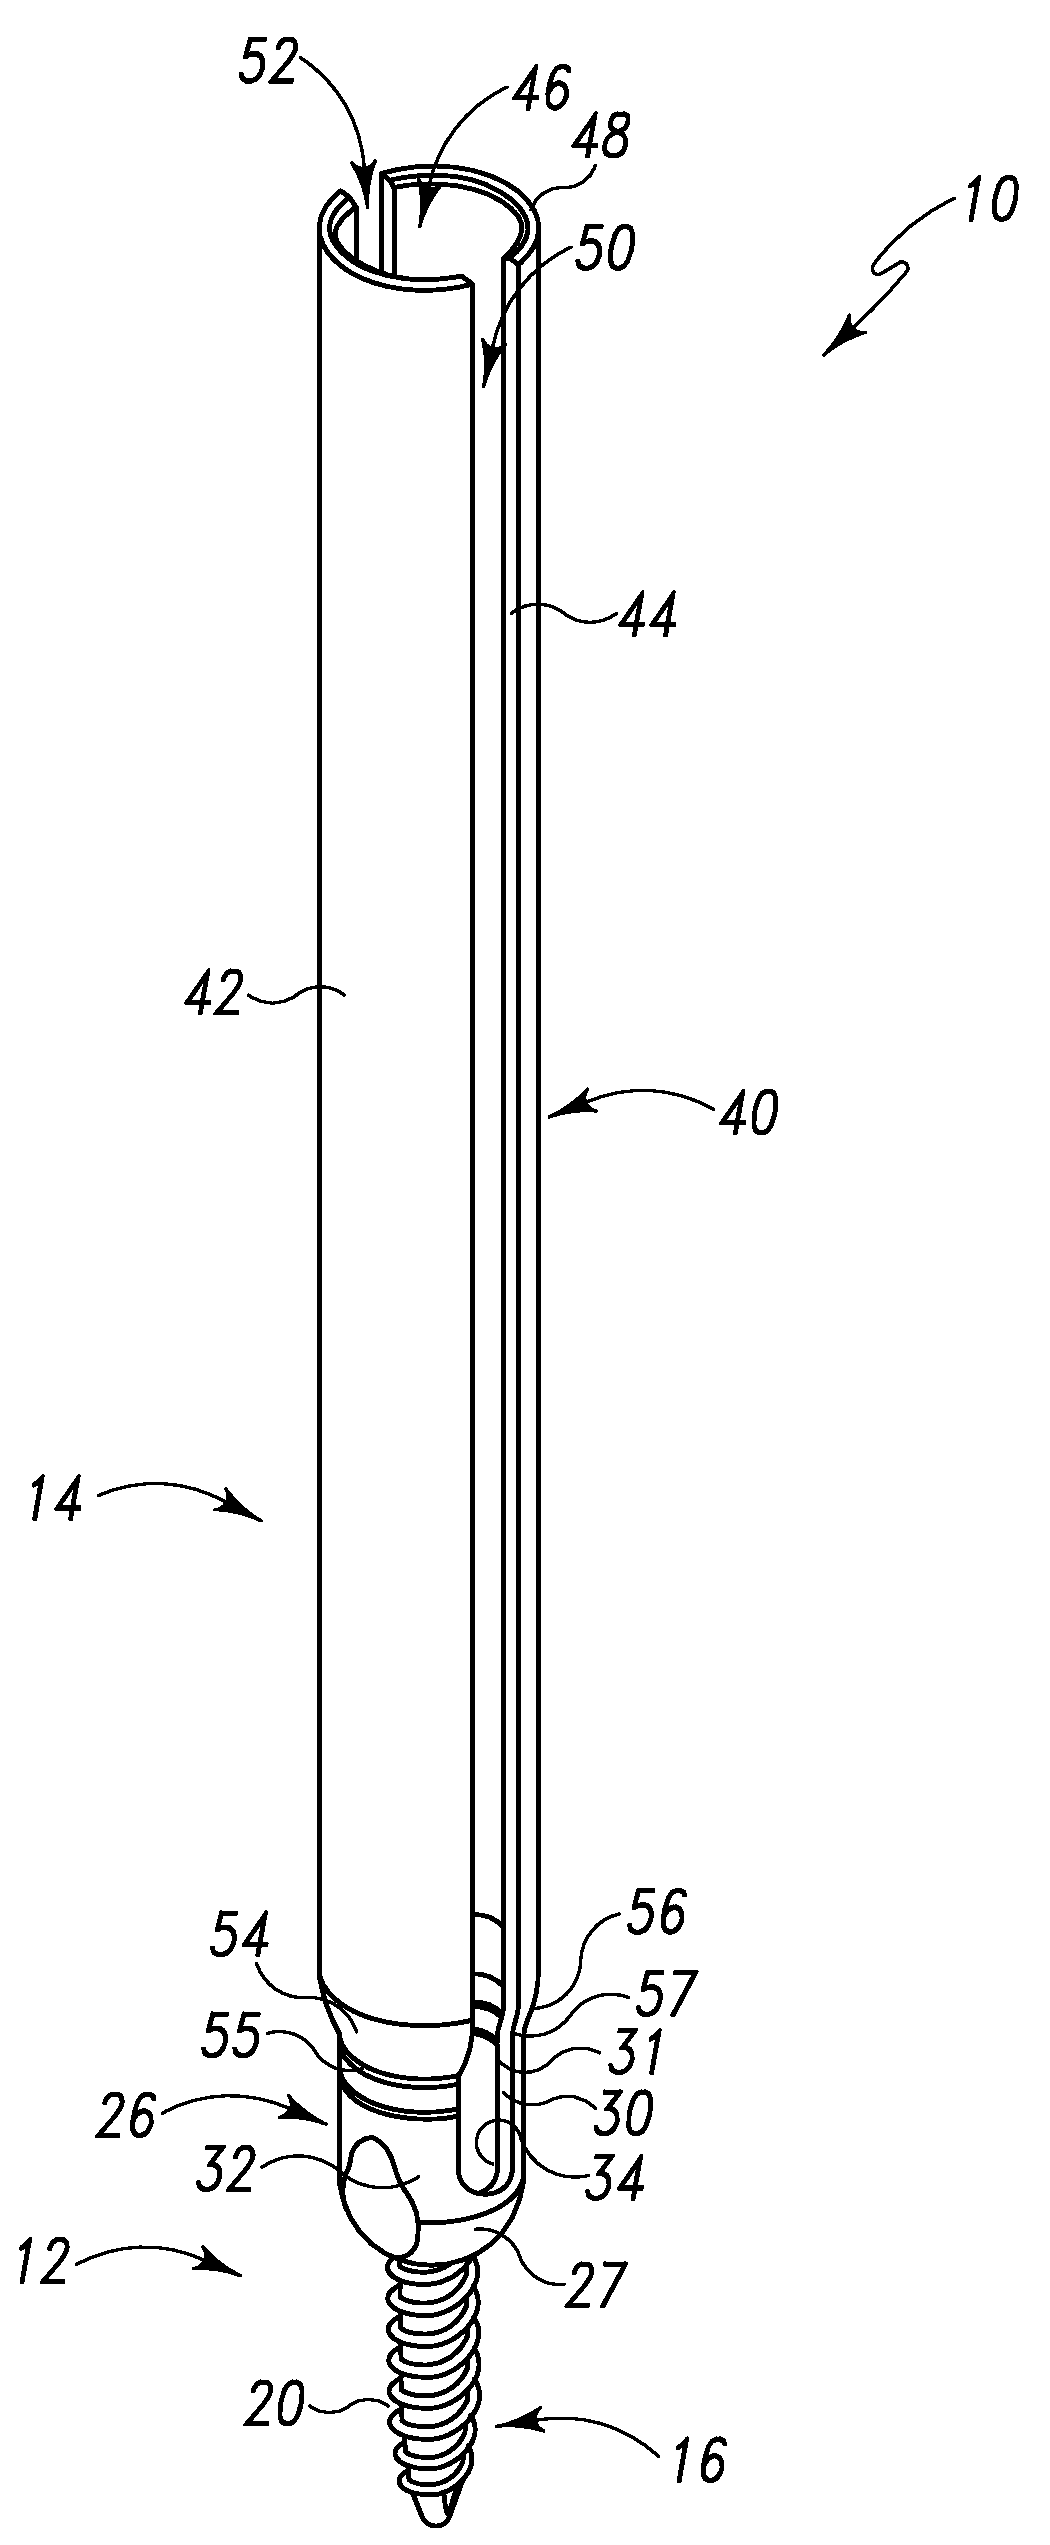 Spinal Rod Guide For A Vertebral Screw Spinal Rod Connector Assembly